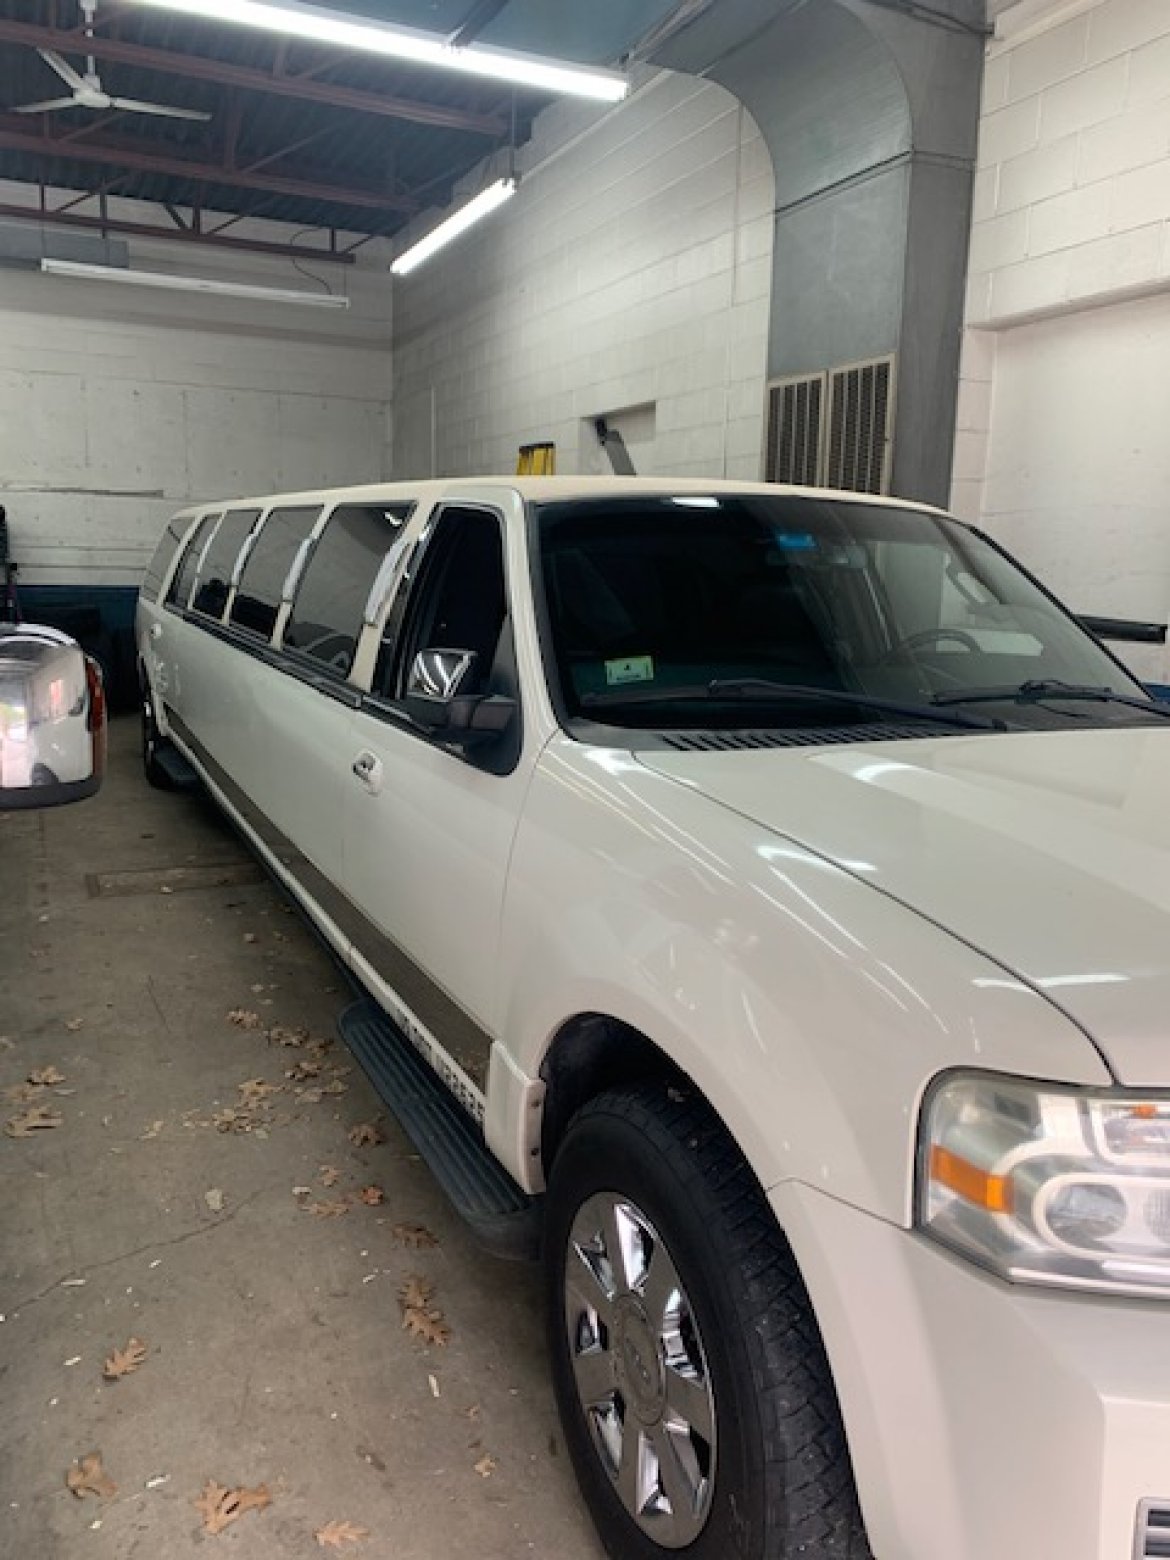 SUV Stretch for sale: 2008 Lincoln Navigator 140&quot; by Royale Coach